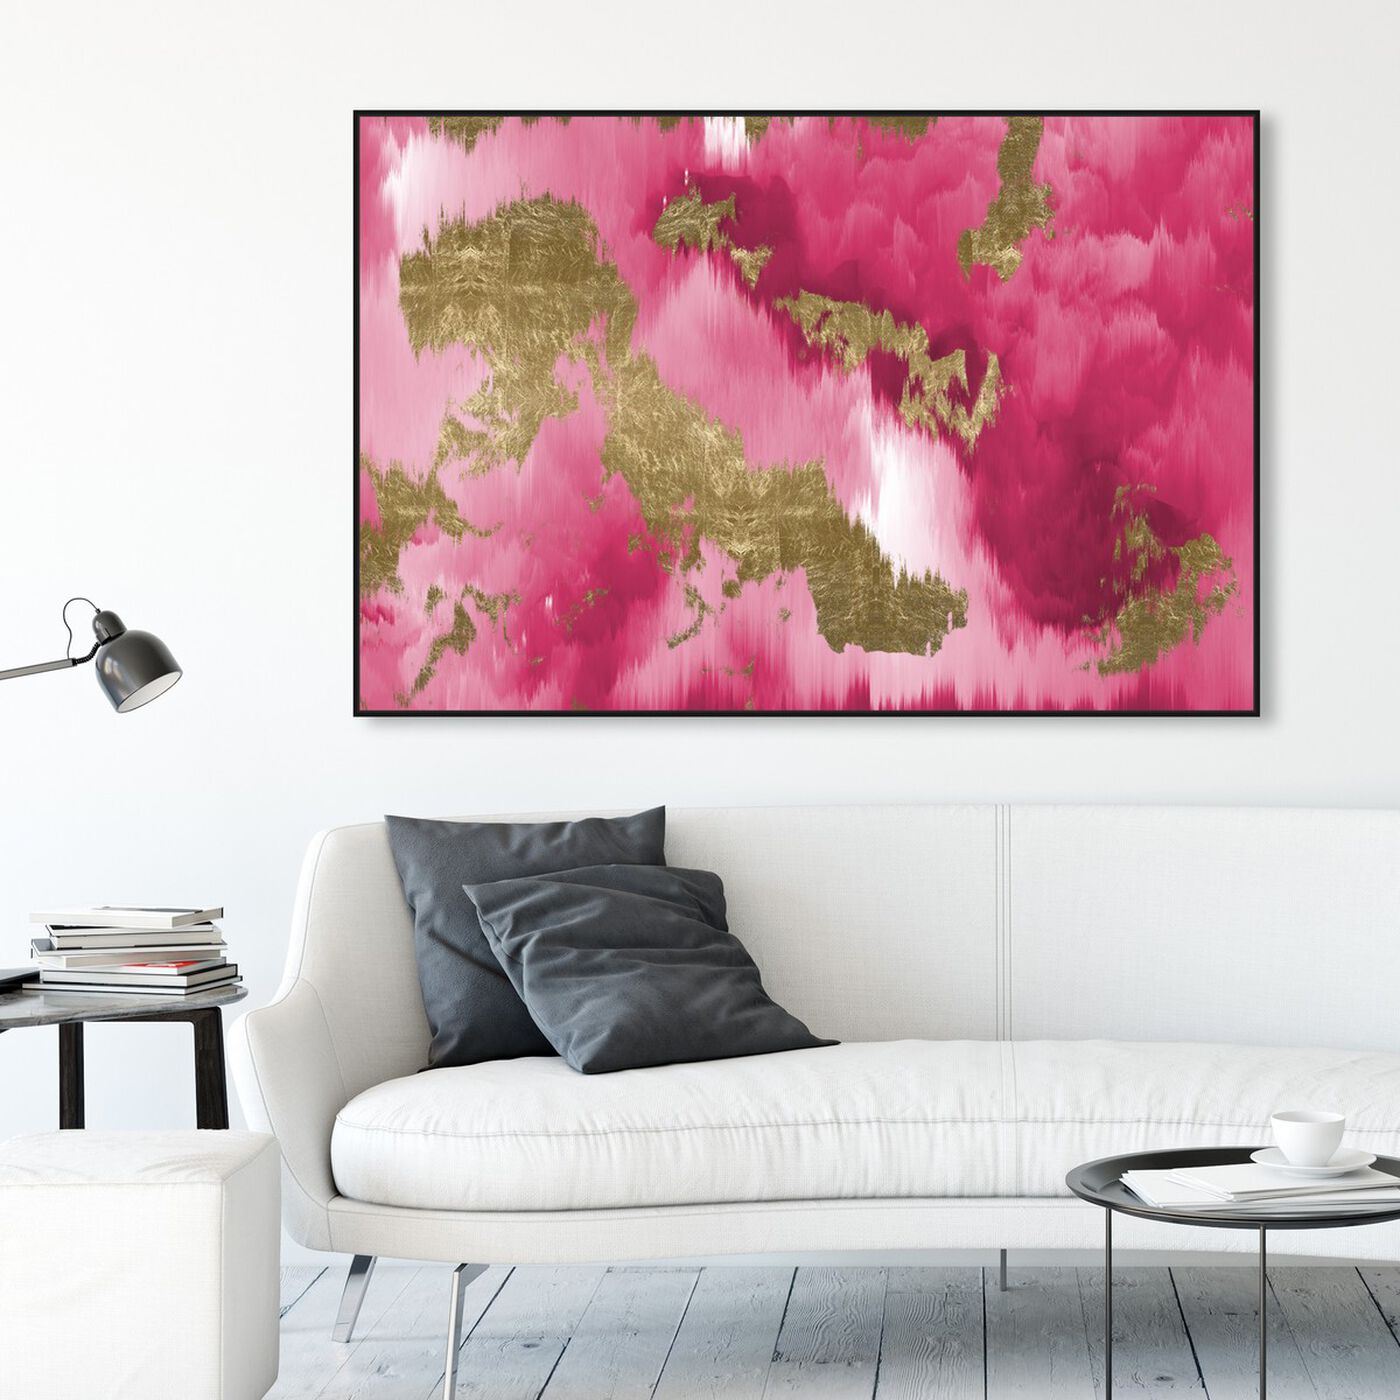 Hanging view of Vivanti Gold featuring abstract and textures art.